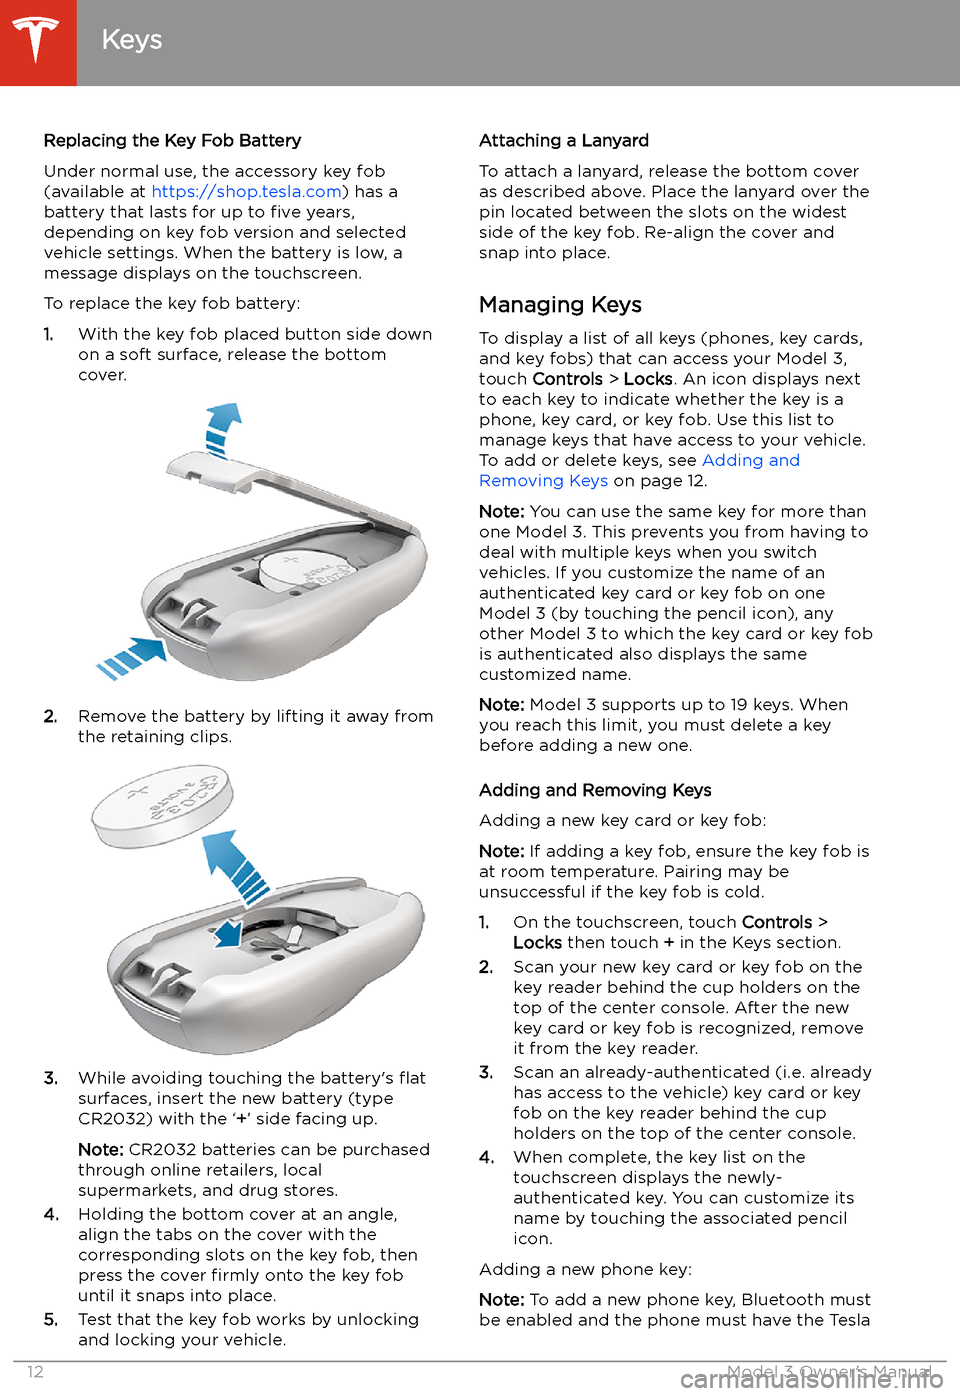 TESLA MODEL 3 2020  Owners Manuals Replacing the Key Fob Battery
Under normal use, the accessory key fob
(available at  https://shop.tesla.com ) has a
battery that lasts for up to  five years,
depending on key fob version and selected
